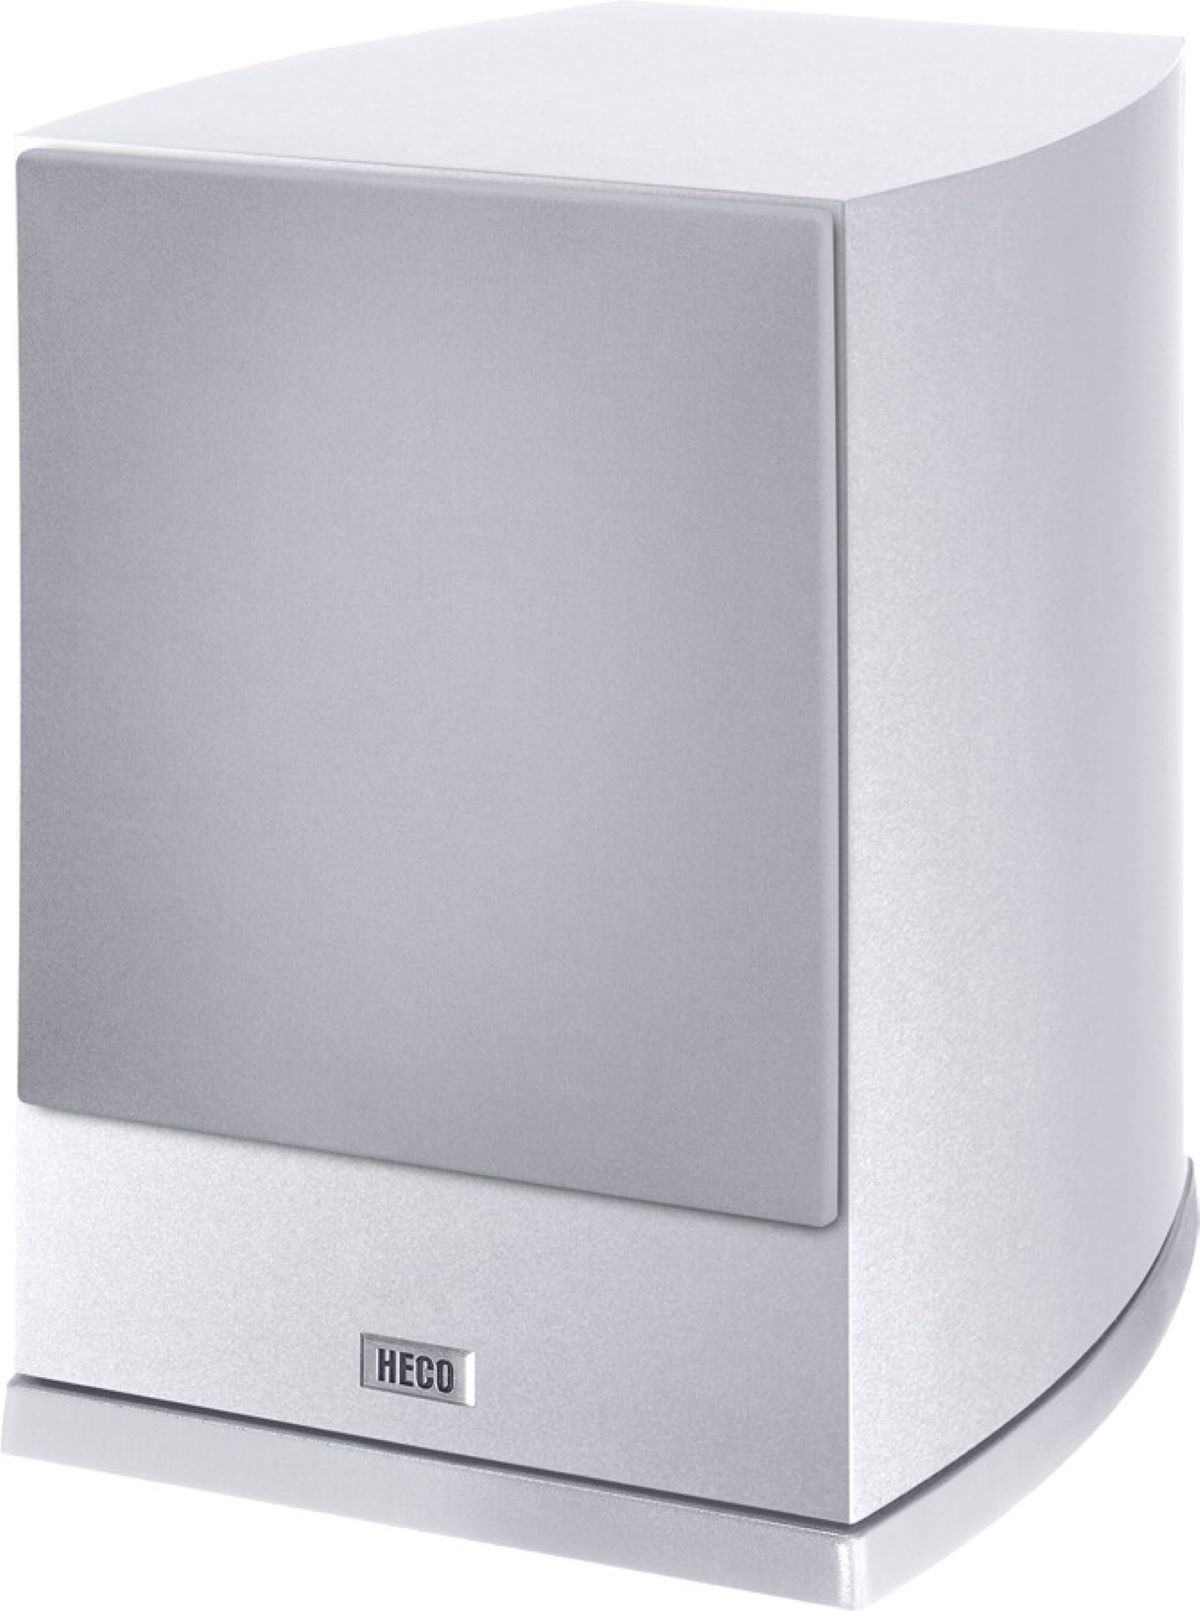 HECO 252A weiss SUB ELITE Subwoofer, VICTA